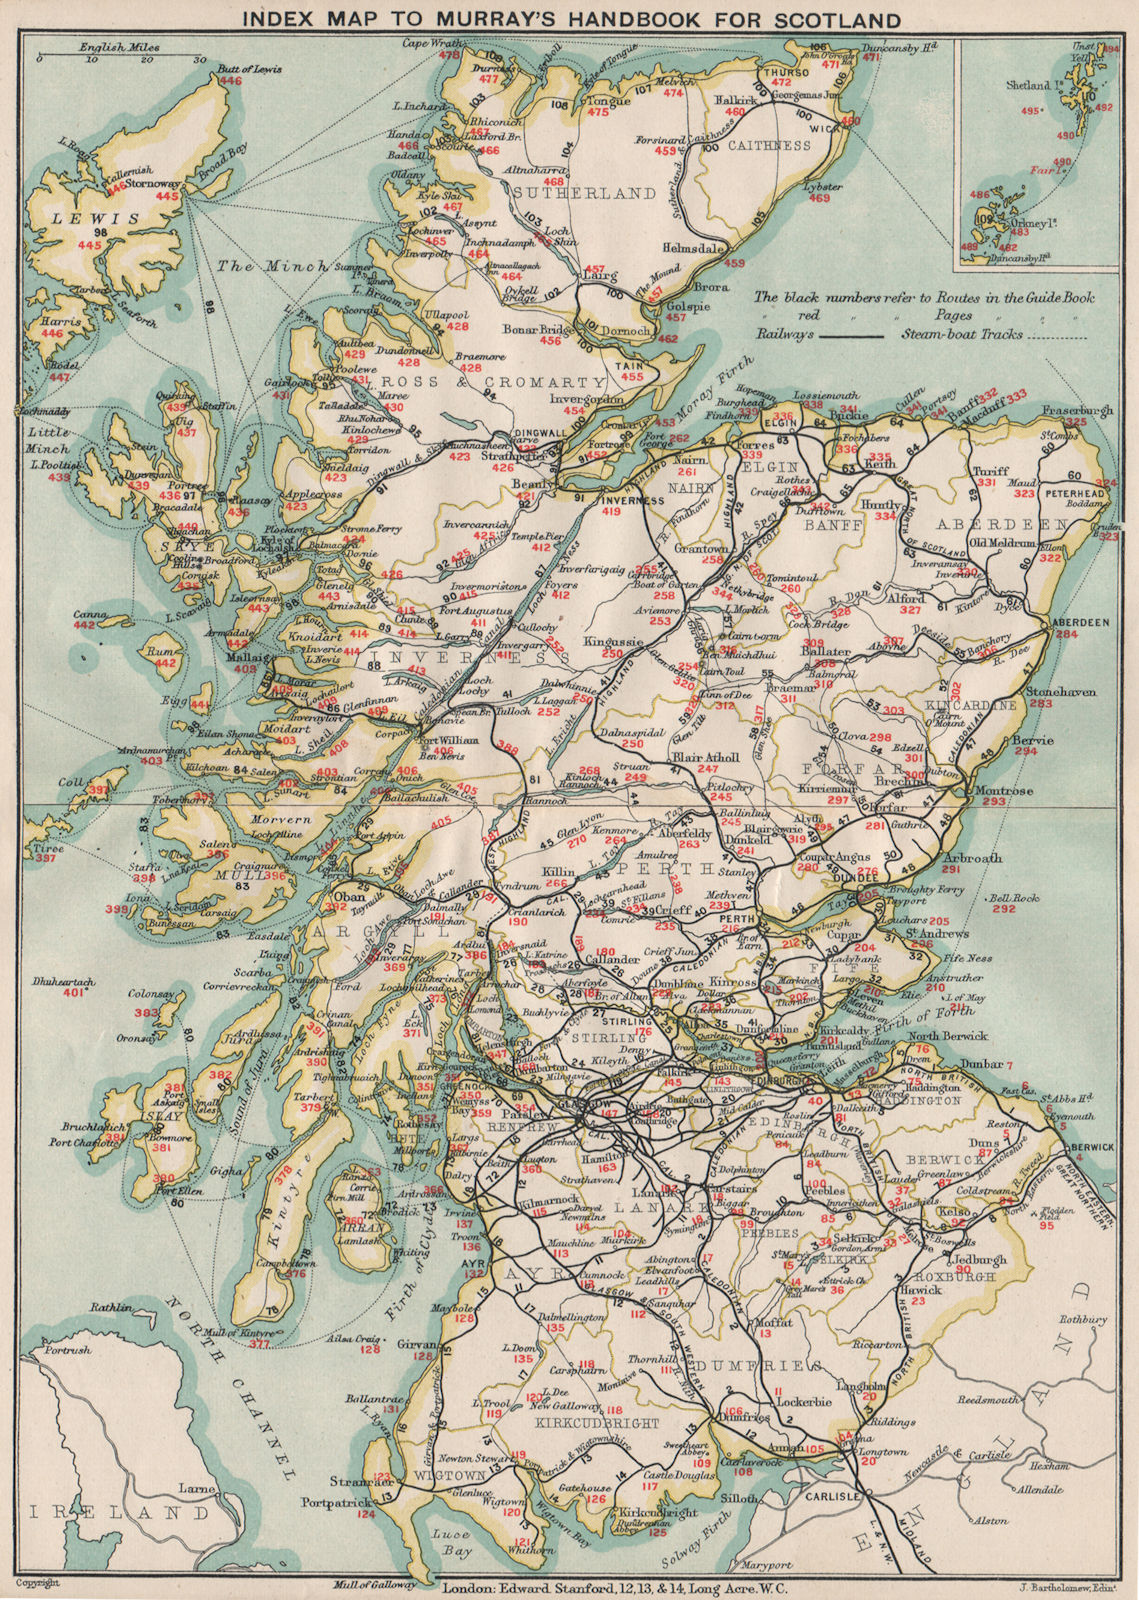 Associate Product SCOTLAND. Index map to Murray's Handbook for Scotland. STANFORD 1905 old